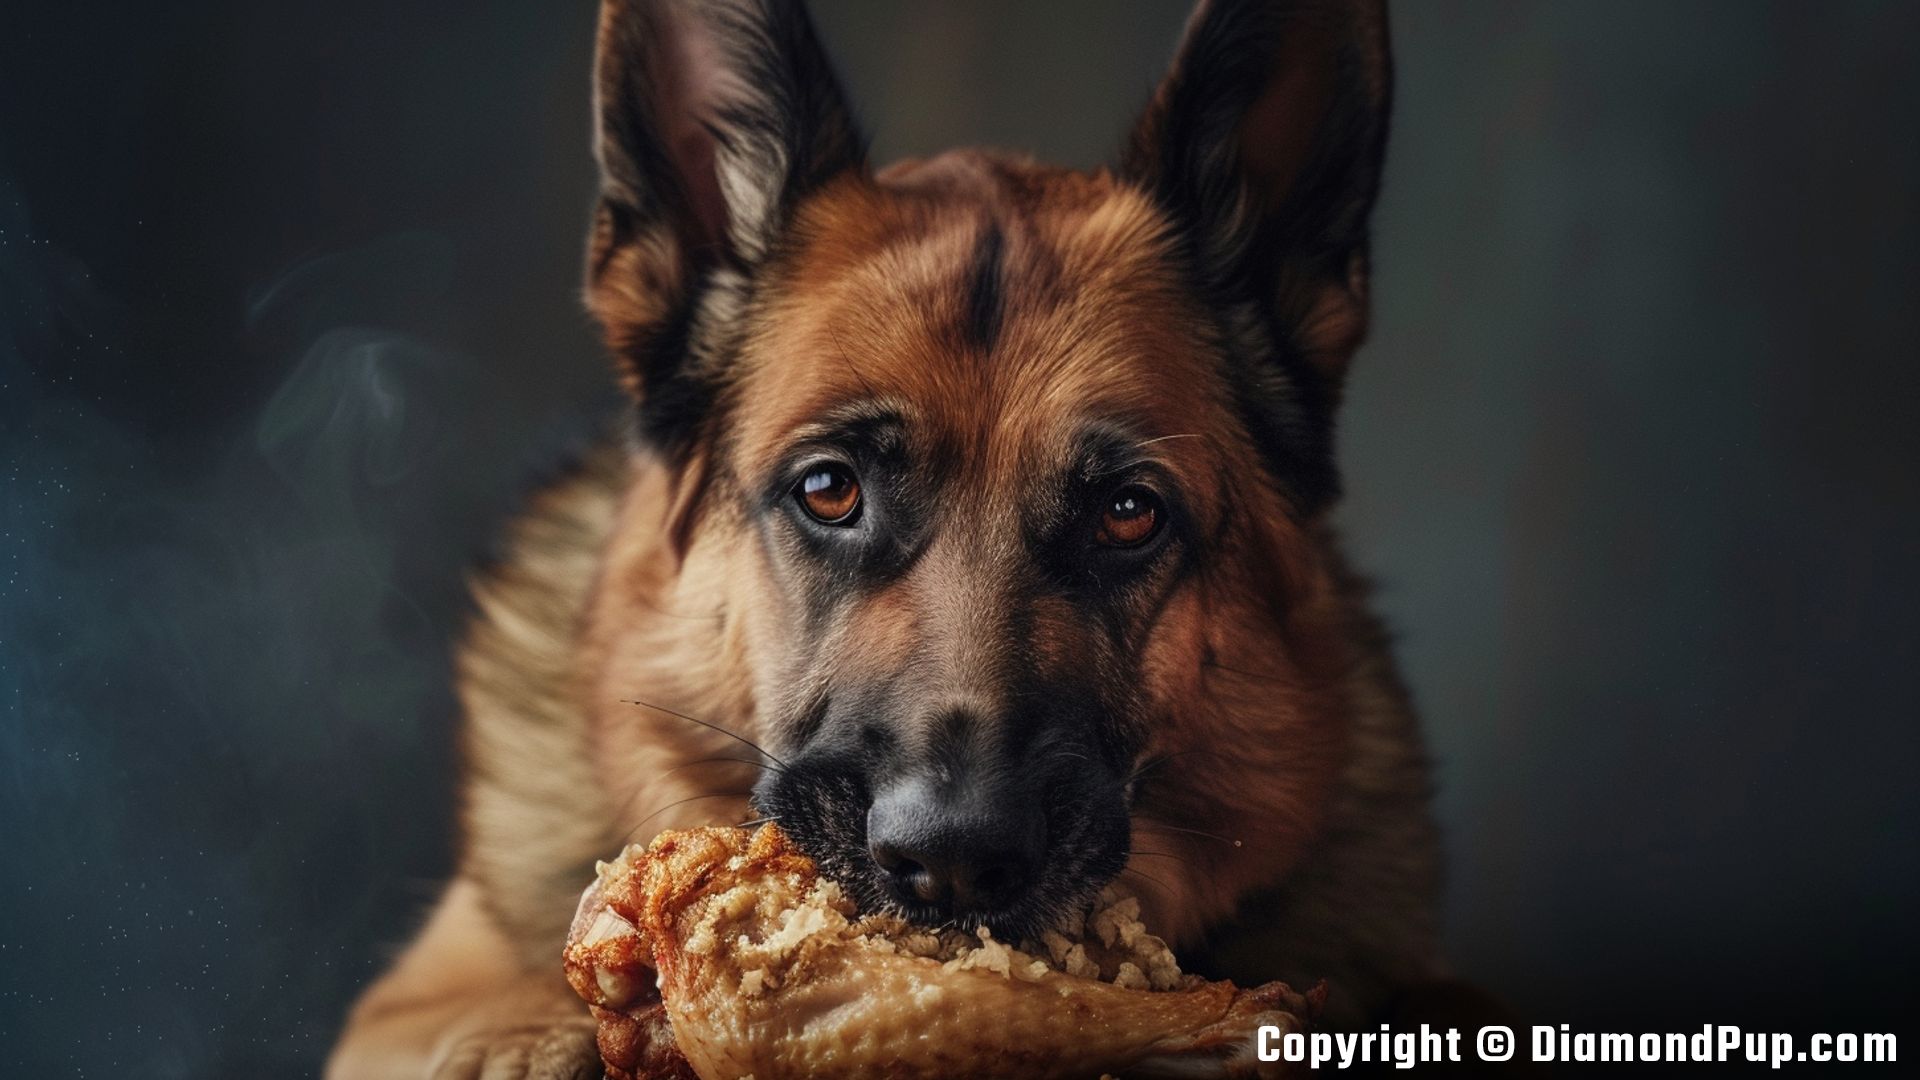 Photograph of a Cute German Shepherd Snacking on Chicken